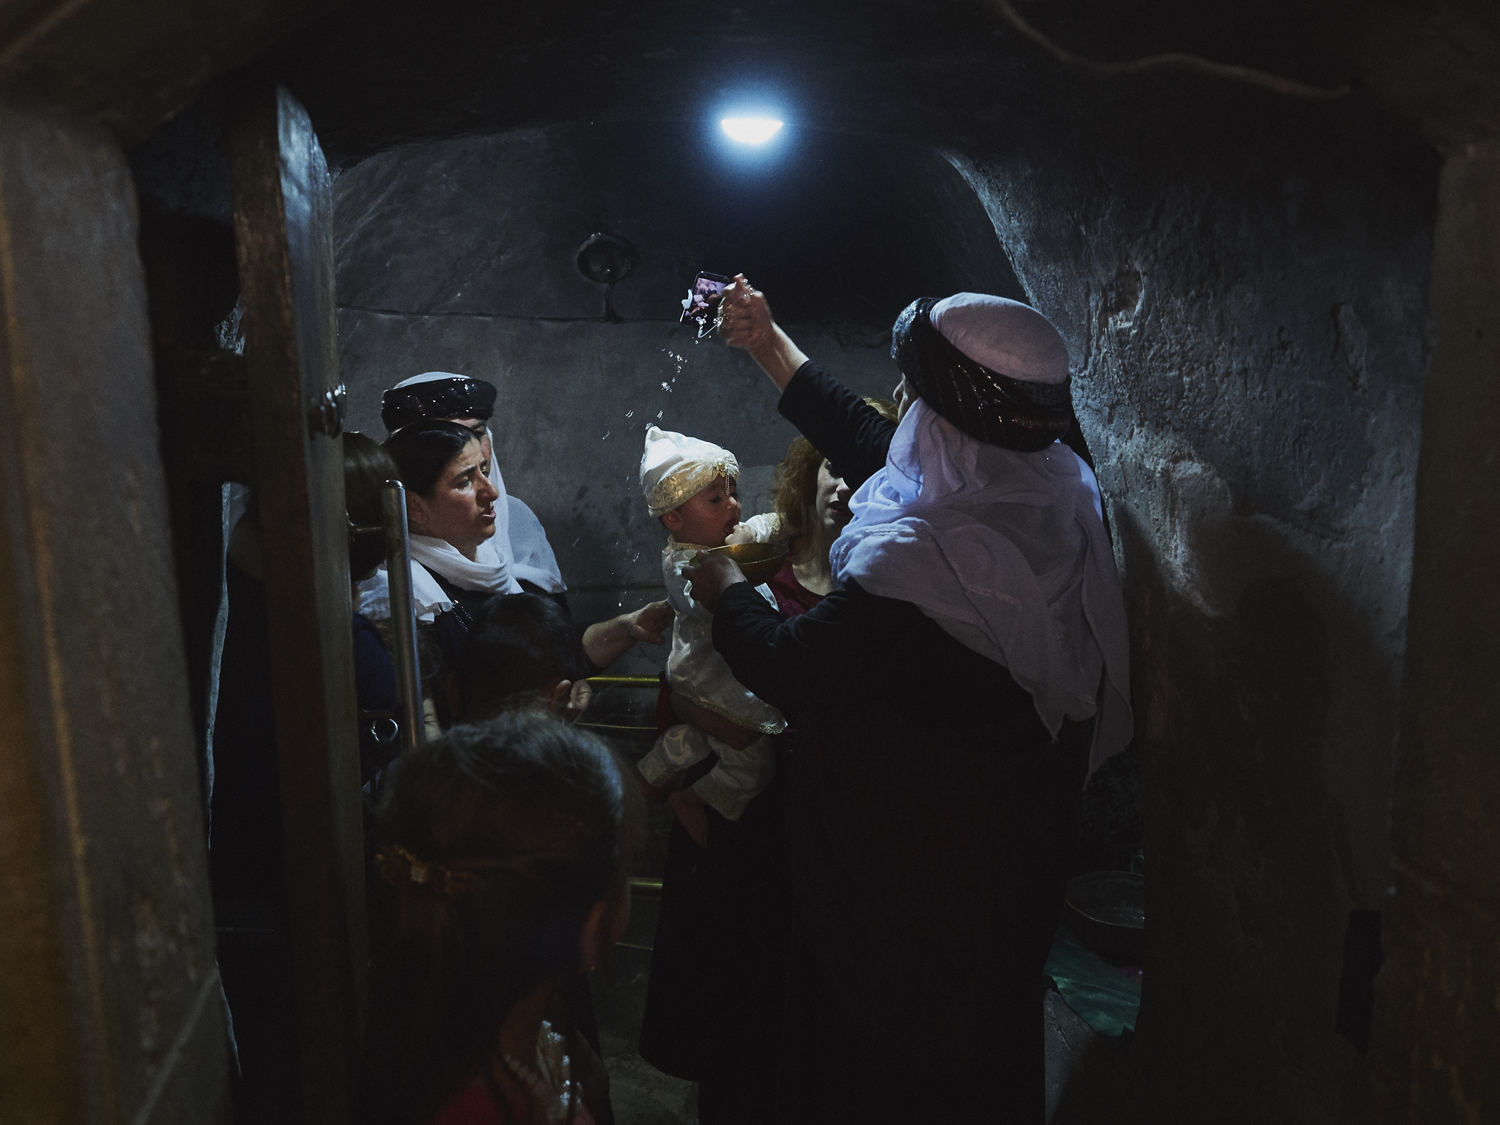 Lalish, Northern Iraq. Yazidi families are expected to baptise their children within the first two years of their lives. The generation of children brought to Lalish for the ceremony were born following the genocide, and are thought to represent the community's hopes for a more peaceful future.